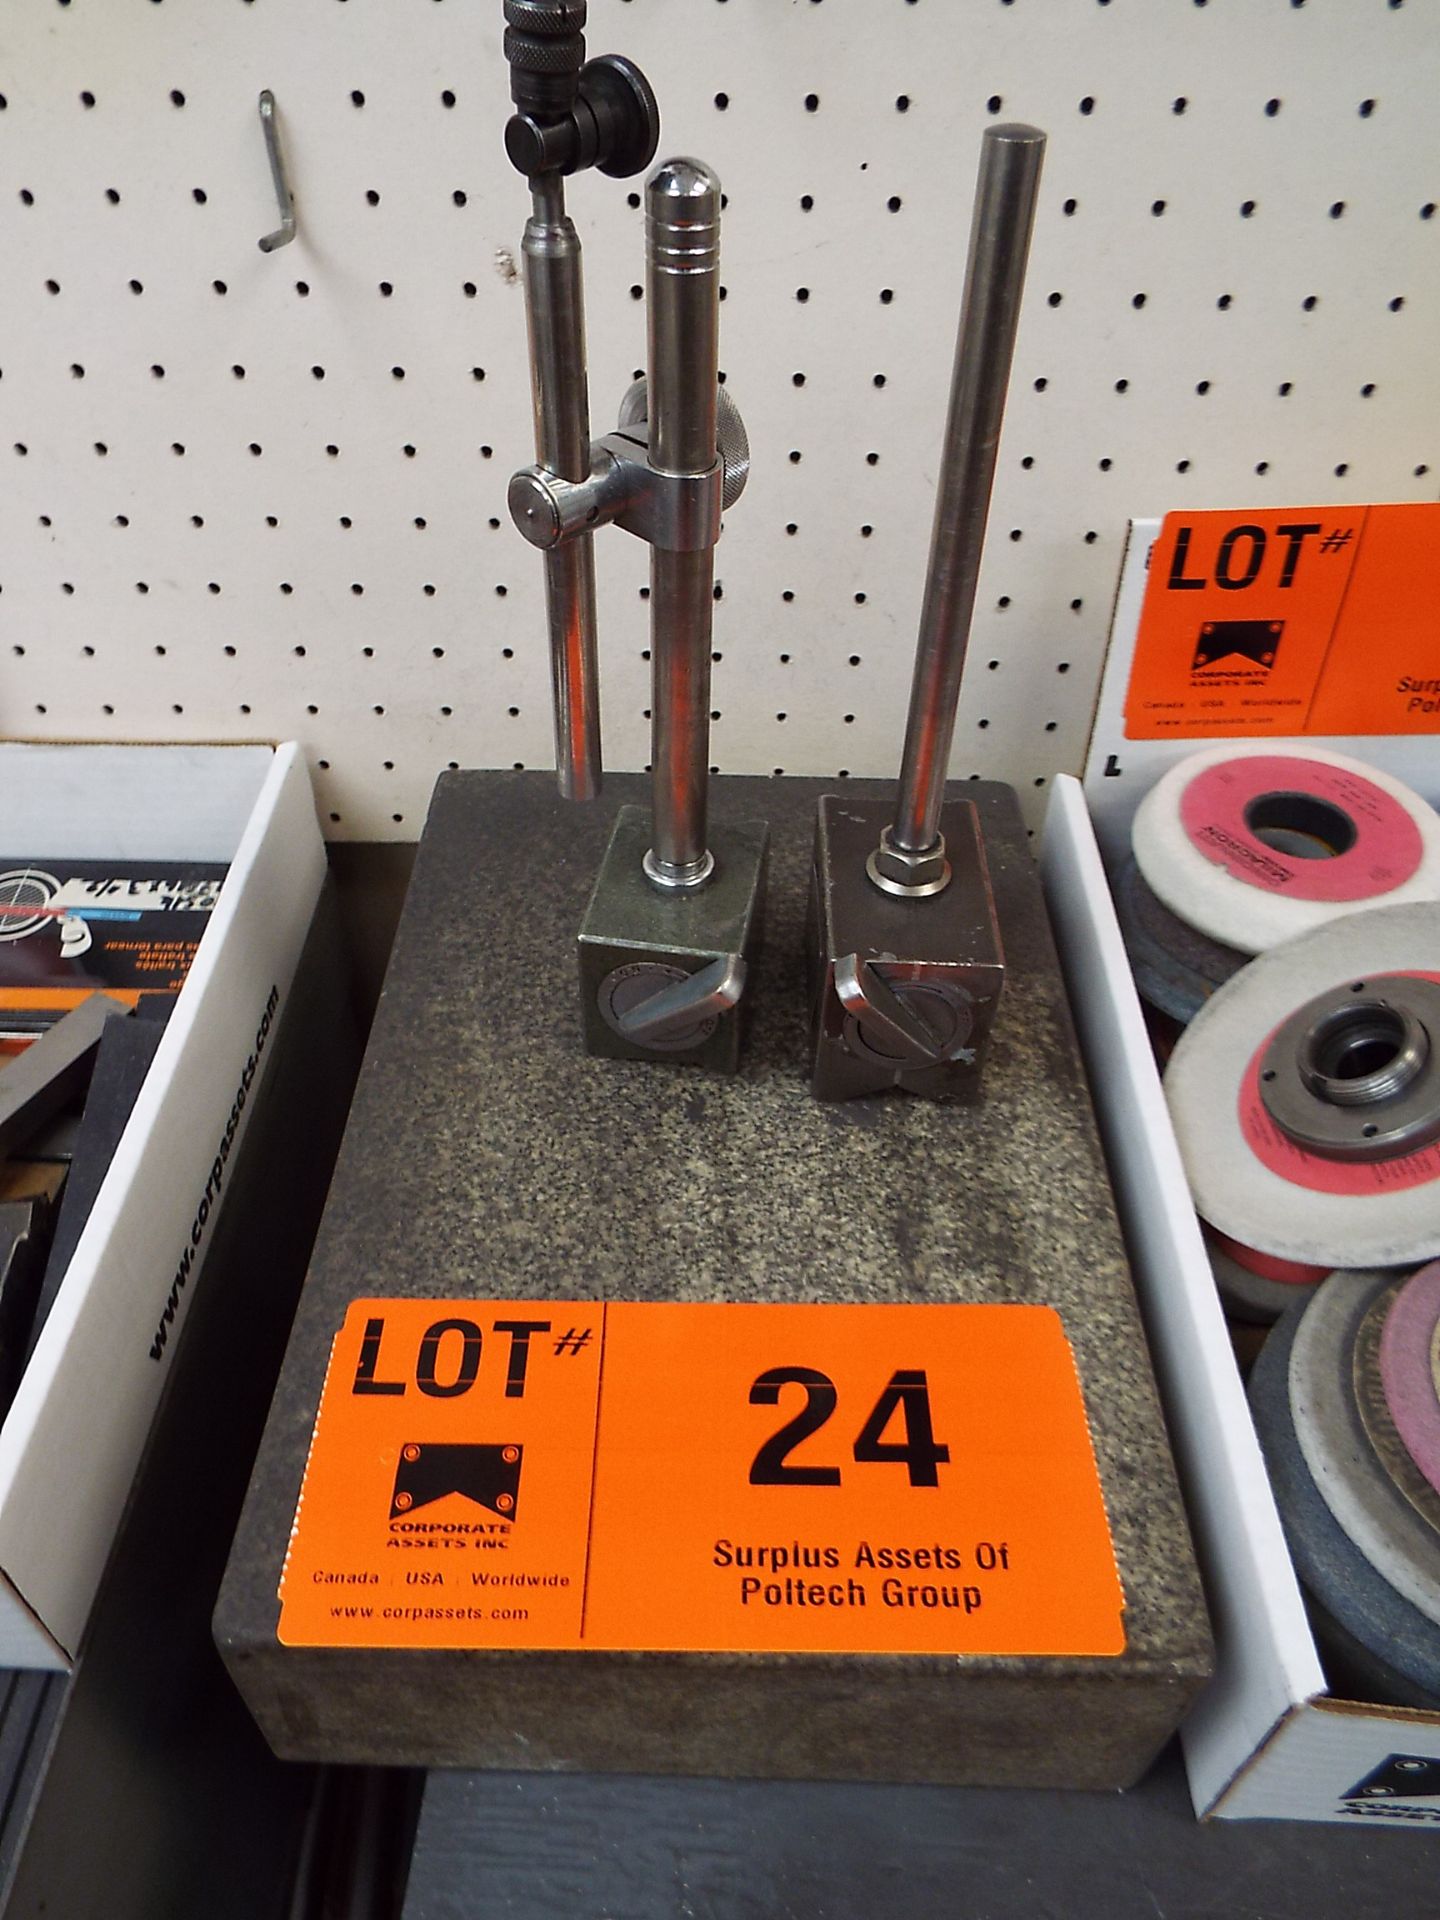 LOT/ 12"X8.25"X3" GRANITE SURFACE PLATE WITH INSPECTION EQUIPMENT (LOCATED AT 460 SIGNET DR, NORTH